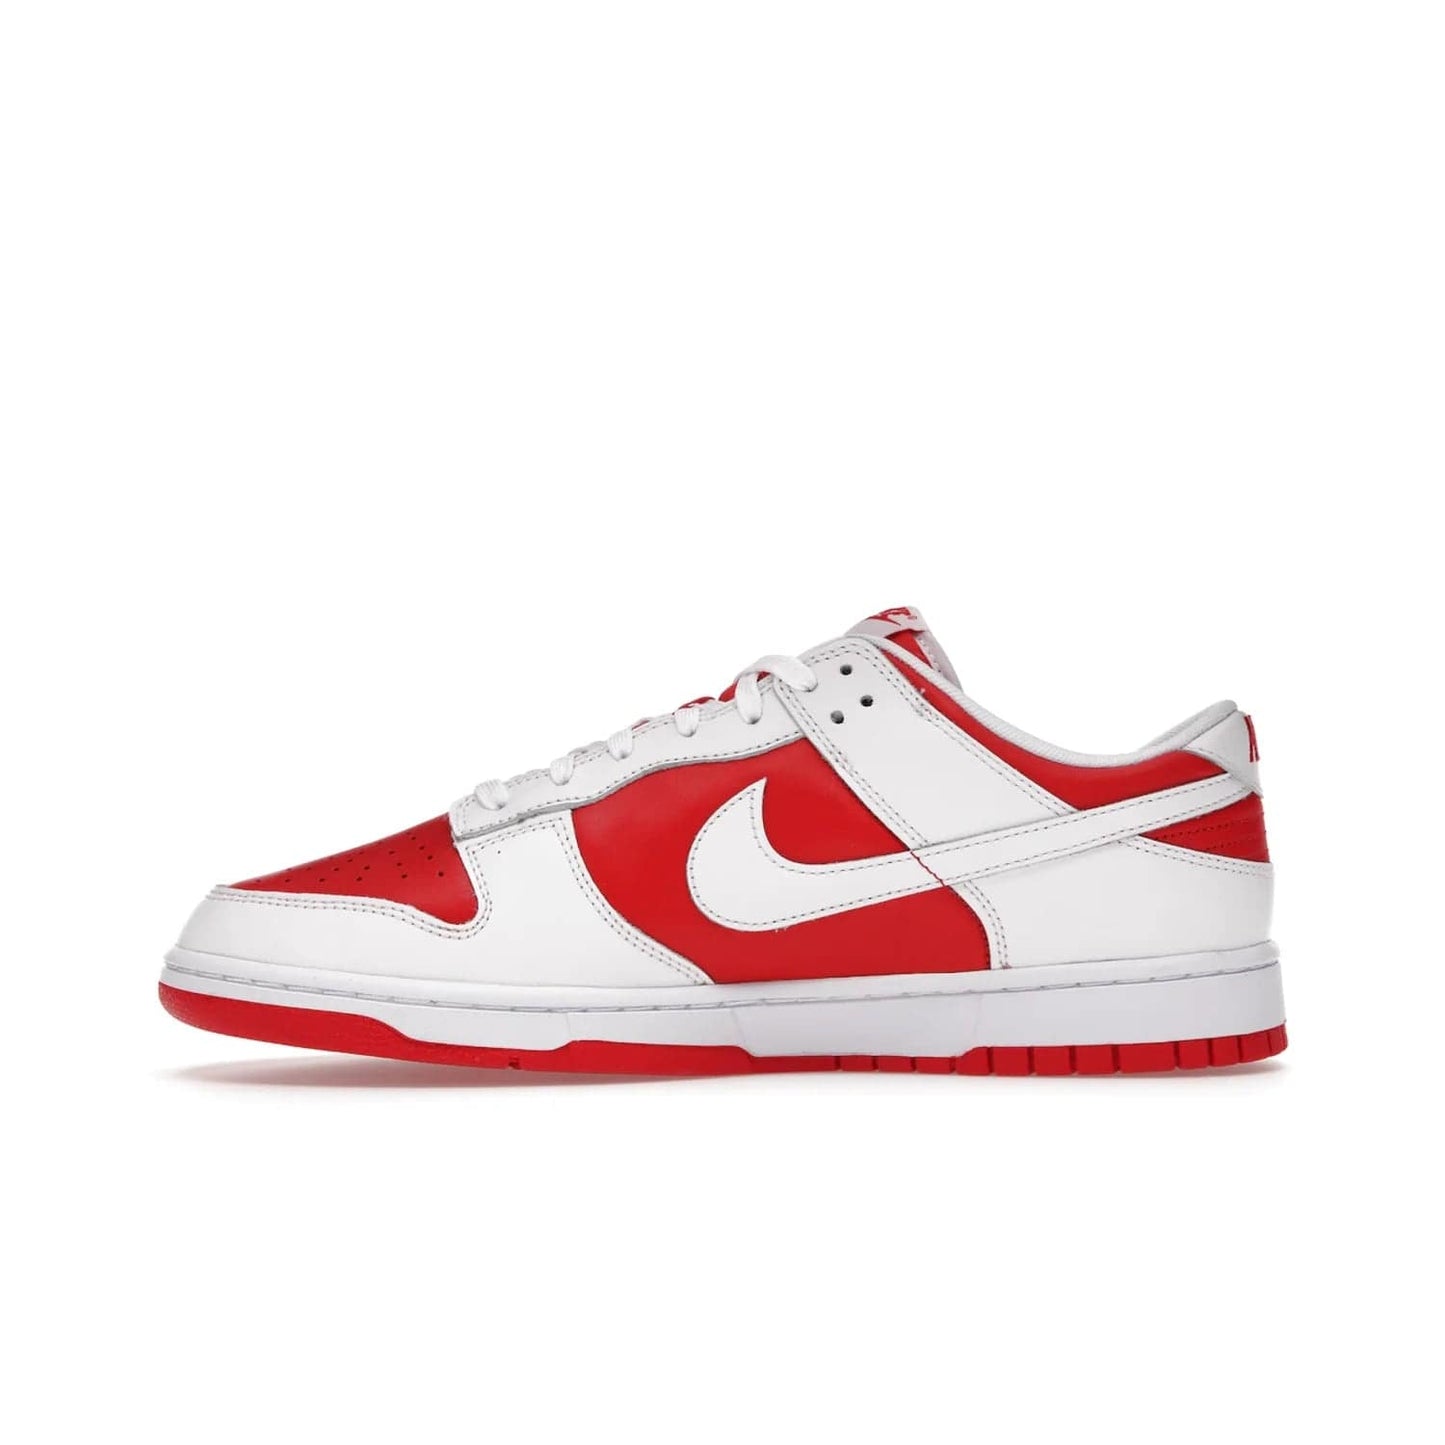 Nike Dunk Low Championship Red (2021) - Image 19 - Only at www.BallersClubKickz.com - A bold and stylish Nike Dunk Low Championship Red from 2021 with a classic retro design. University Red upper, white leather overlays and Swooshes, and a woven tongue label. Make a statement with these sleek kicks!